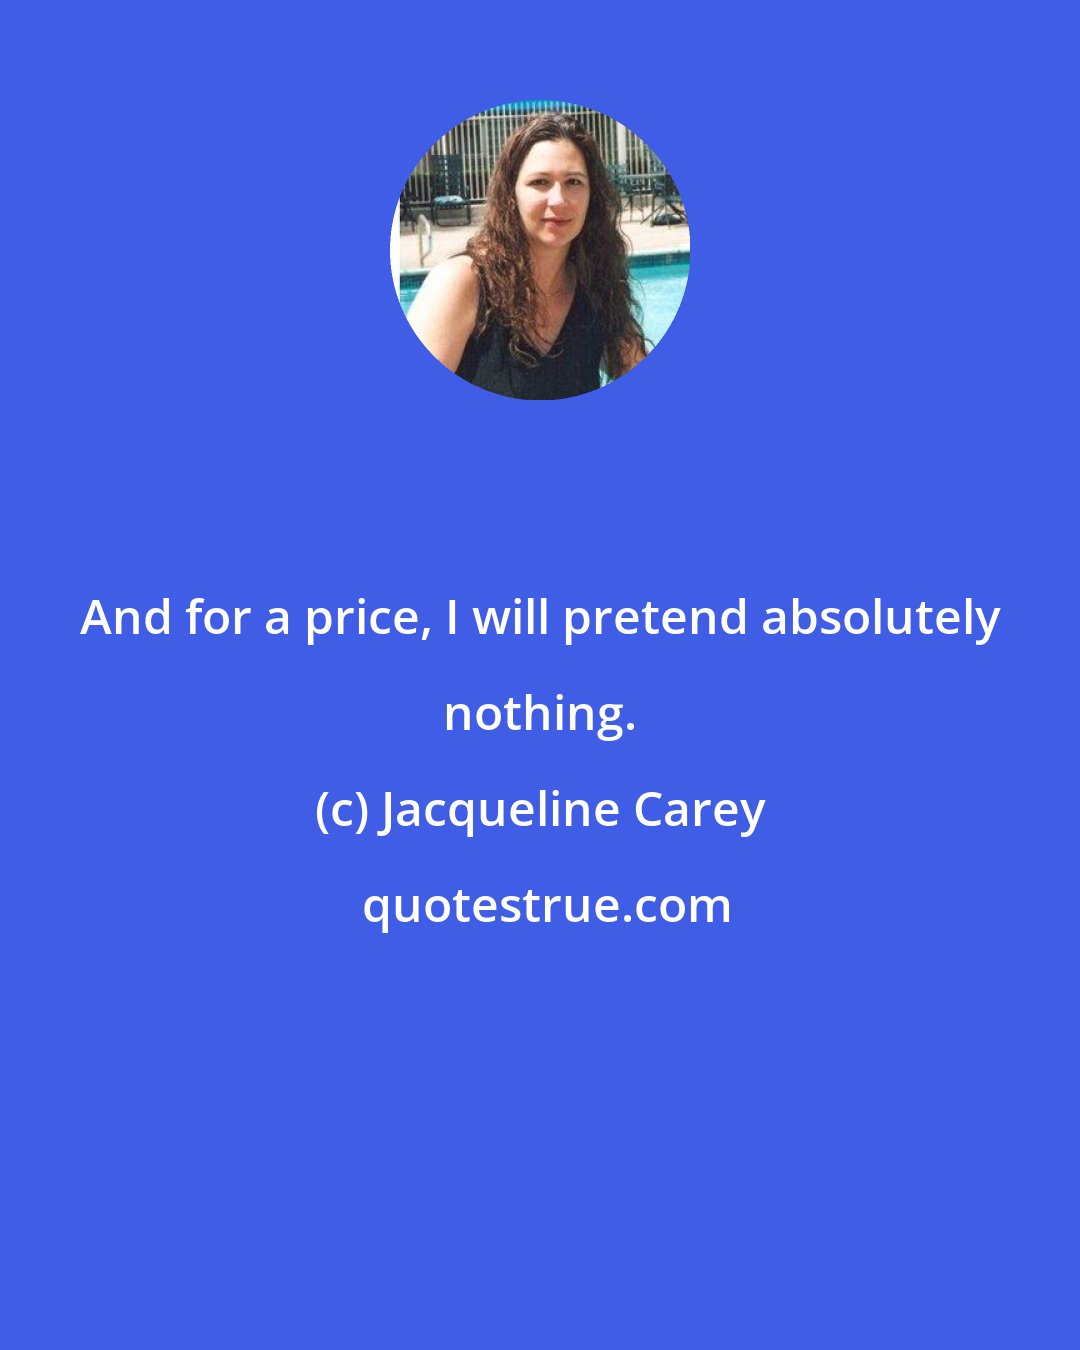 Jacqueline Carey: And for a price, I will pretend absolutely nothing.